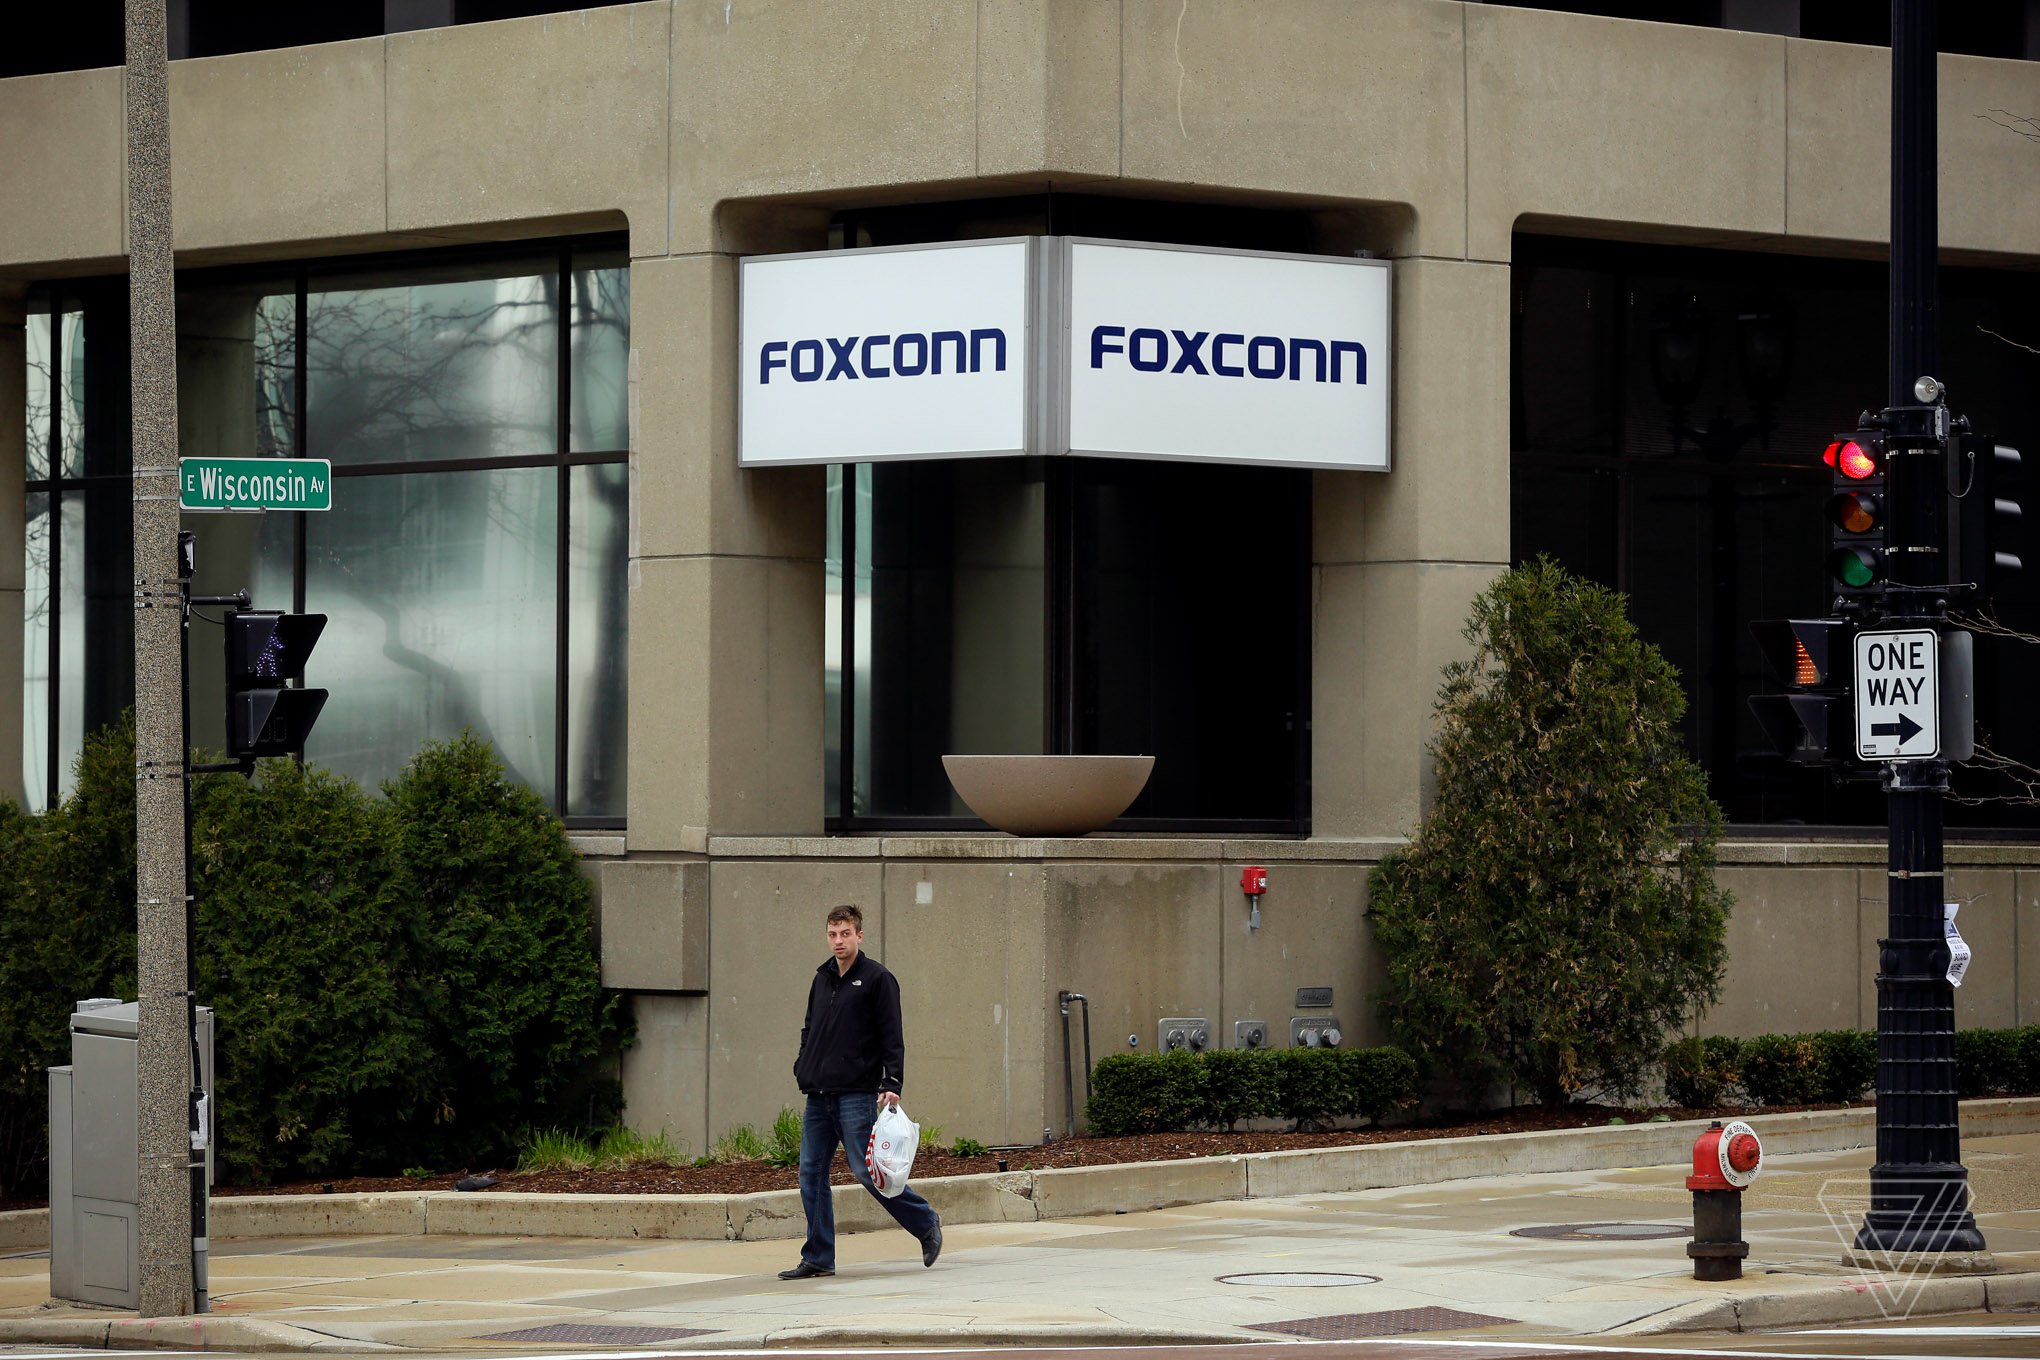 A man walks past an office building with the Foxconn name displayed outside on Wednesday, May 8 2019 in Milwaukee, Wisconsin. Foxconn is a electronics contract manufacturing company, which is constructing a plant in south eastern Wisconsin creating thousands of jobs. 